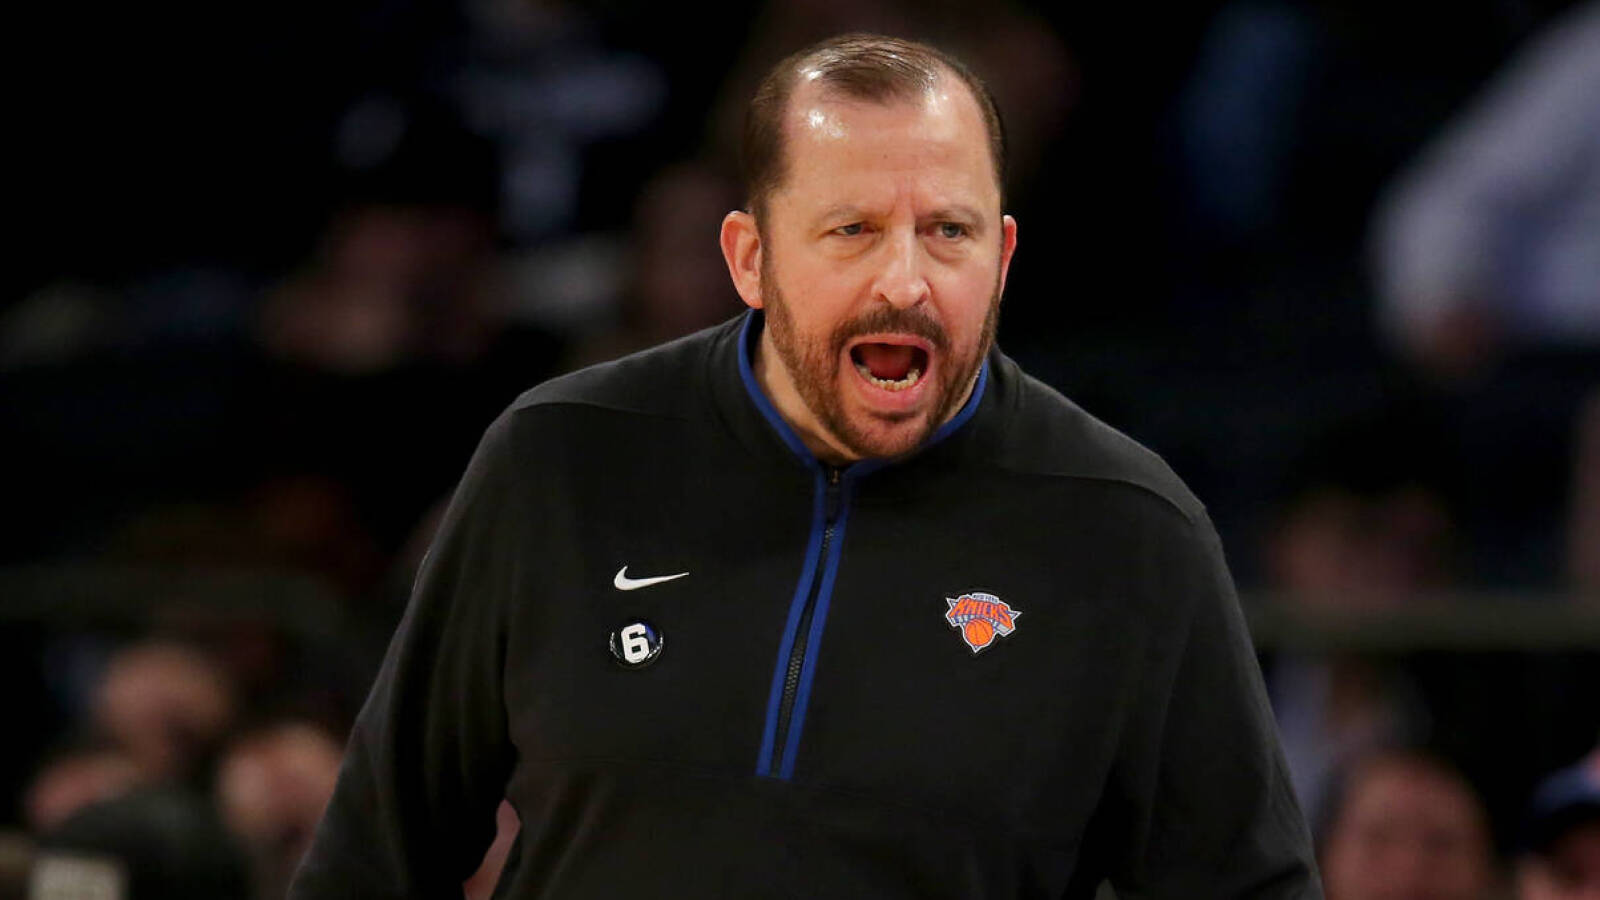 Knicks give up most points ever by a Tom Thibodeau team